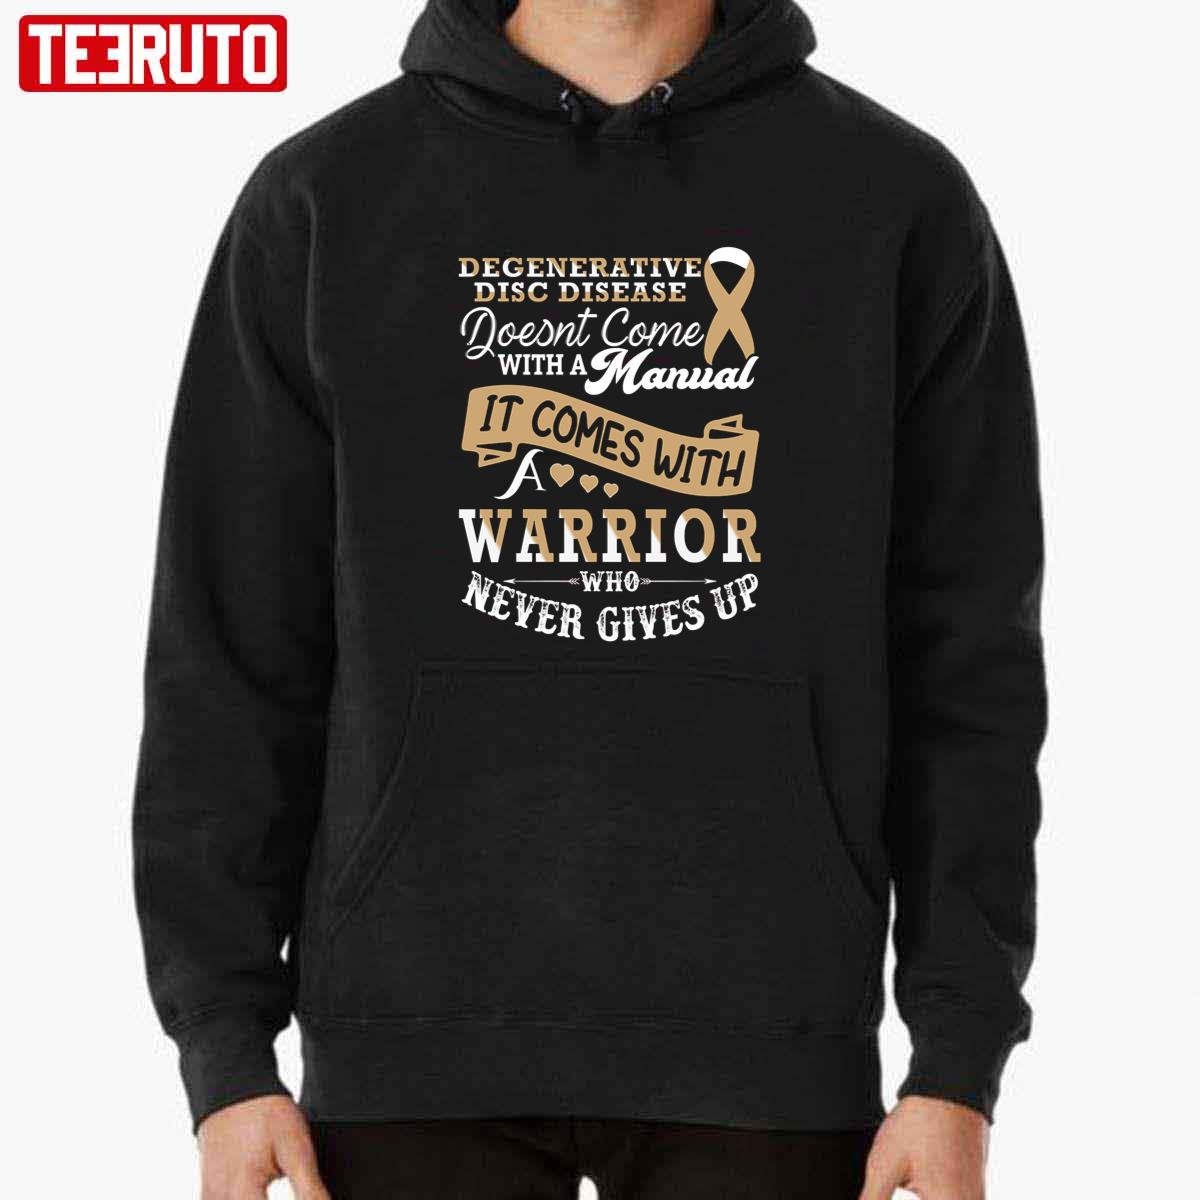 It Comes With A Warrior Who Never Gives Up Degenerative Disc Disease Unisex T-Shirt